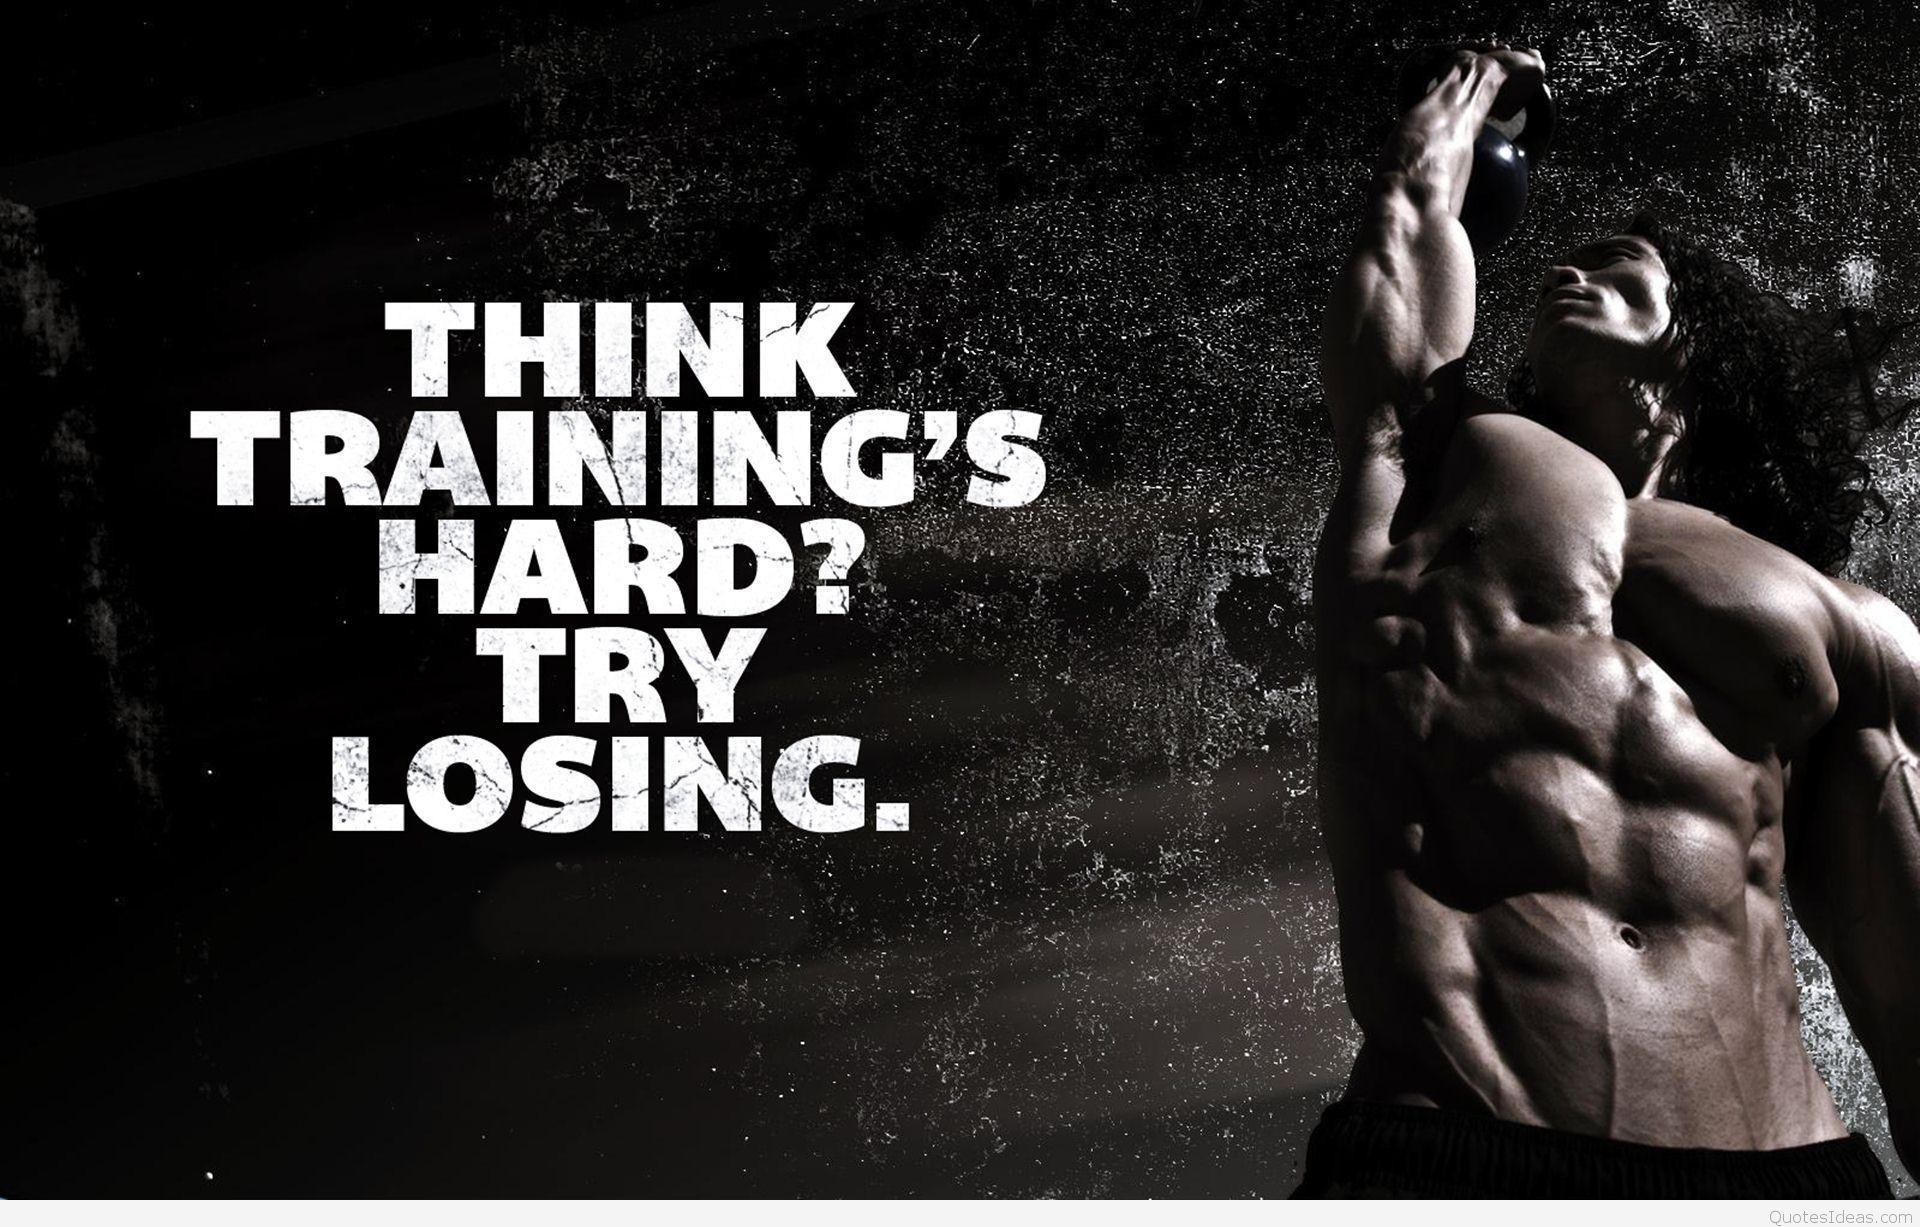 Cute and nice bodybuilding quote wallpaper hd